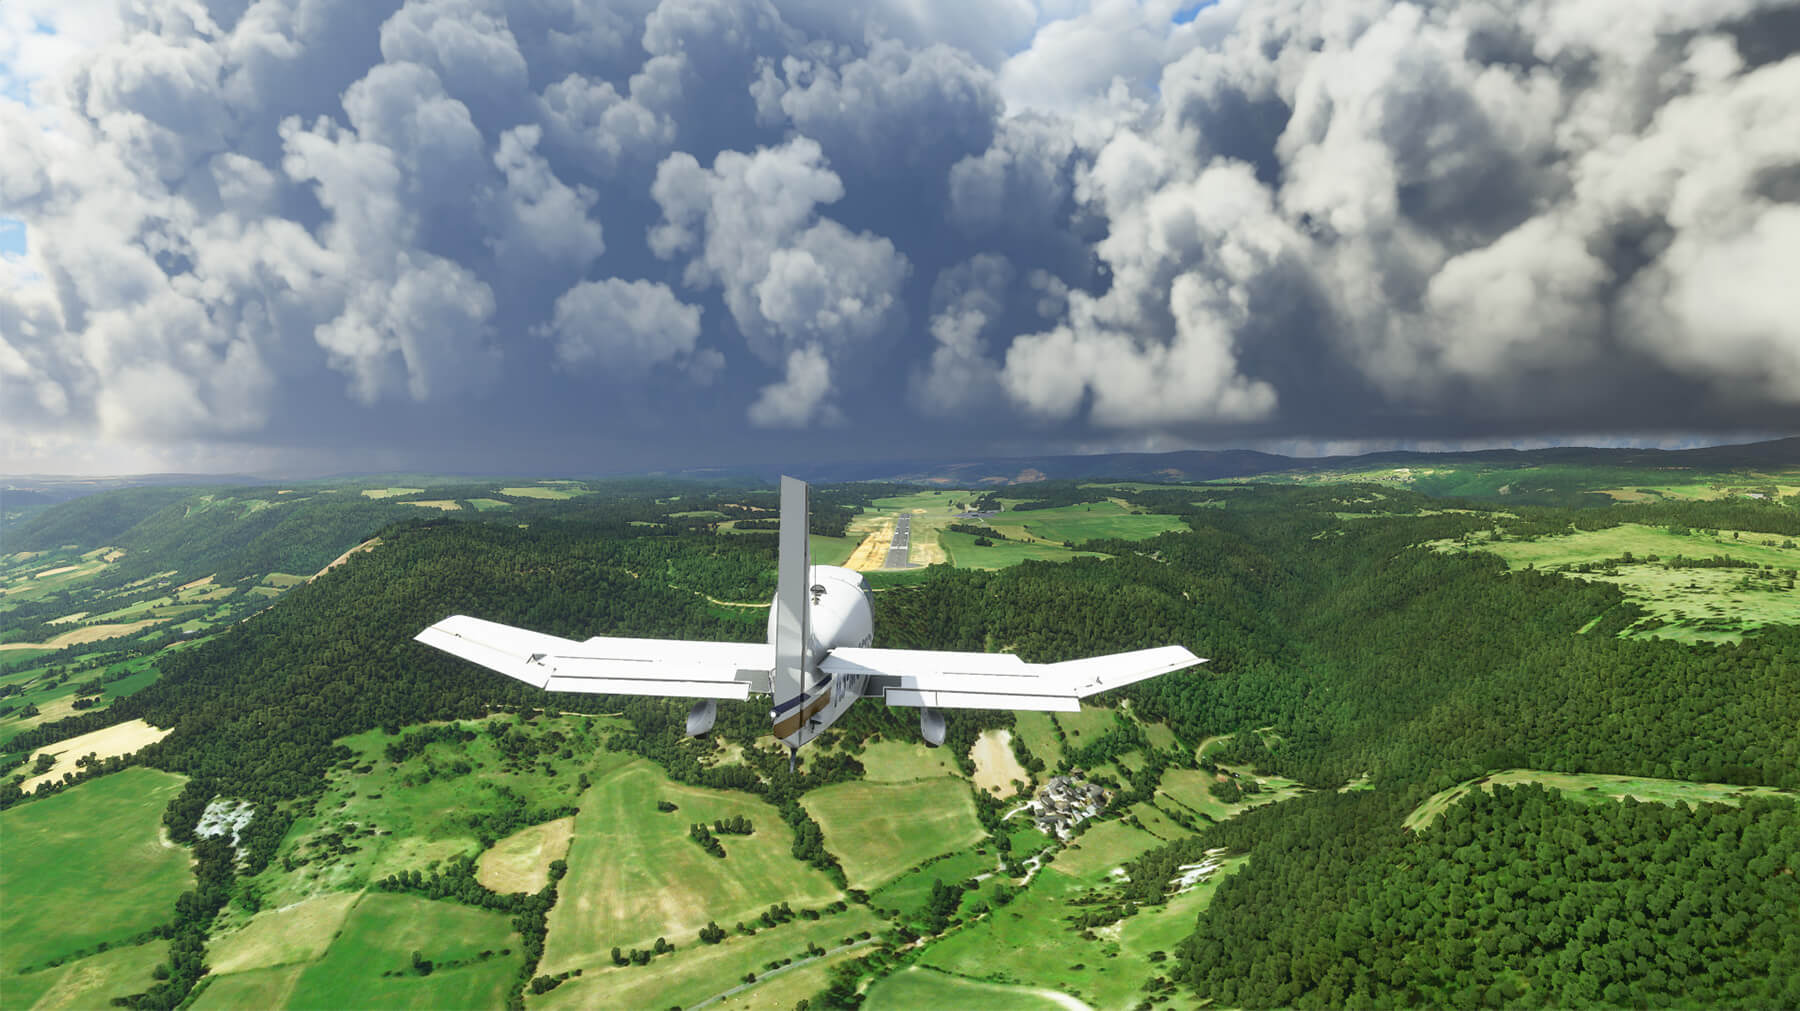 A screenshot from Microsoft Flight Simulator depicting a plane flying over a field with patches of forest.